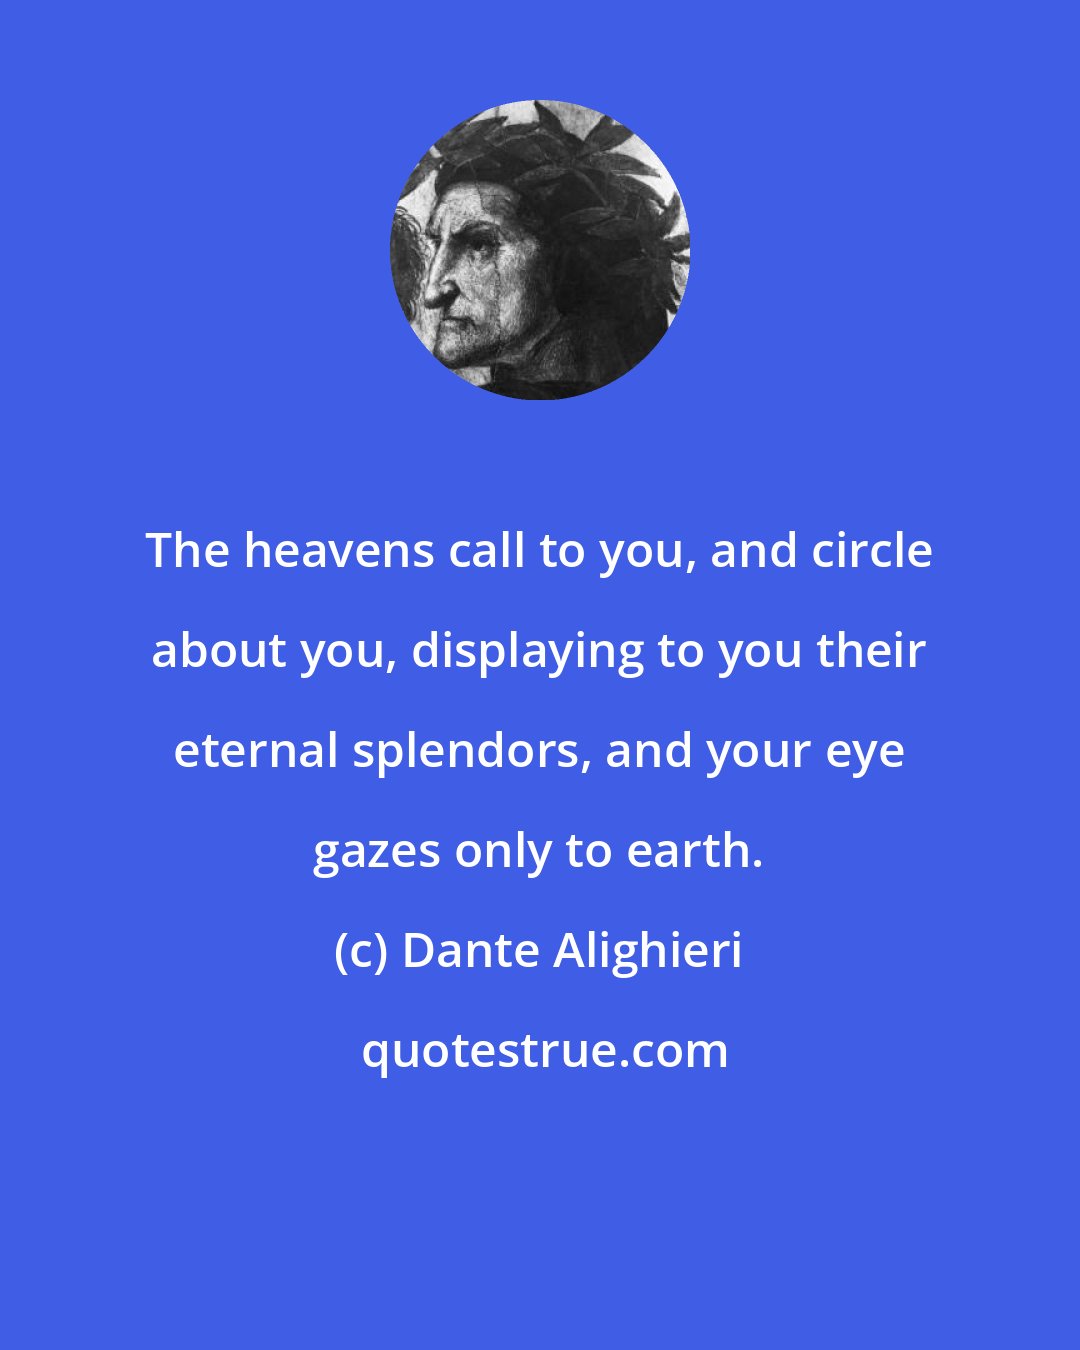 Dante Alighieri: The heavens call to you, and circle about you, displaying to you their eternal splendors, and your eye gazes only to earth.